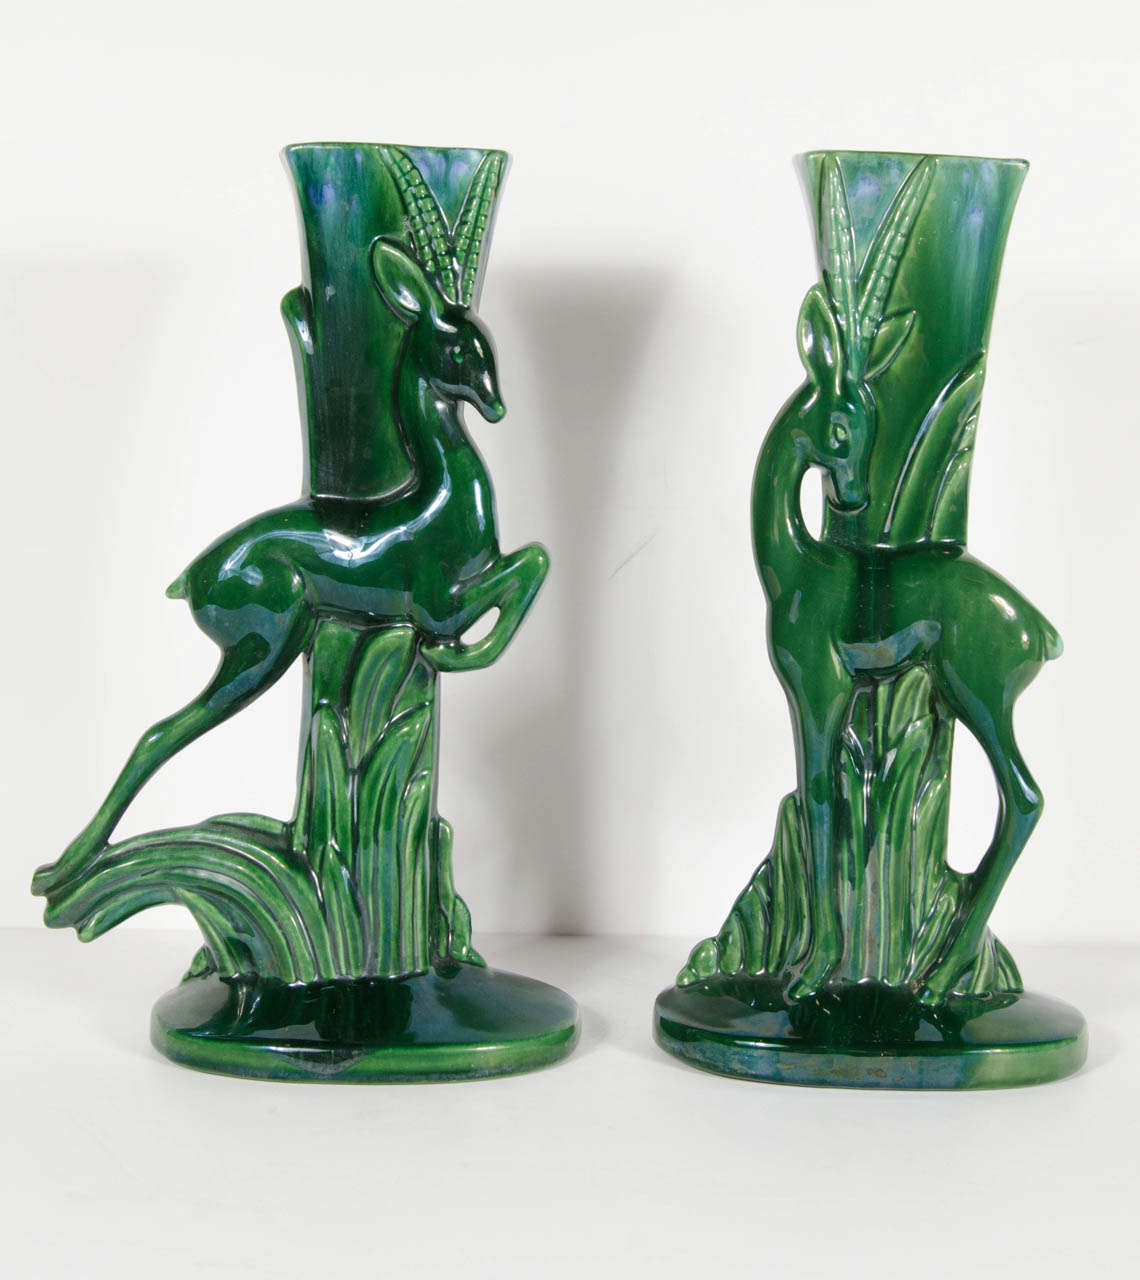 This gorgeous pair of hunter green glazed ceramic vases feature a gazelle with stylized Art Deco foliage and fauna.